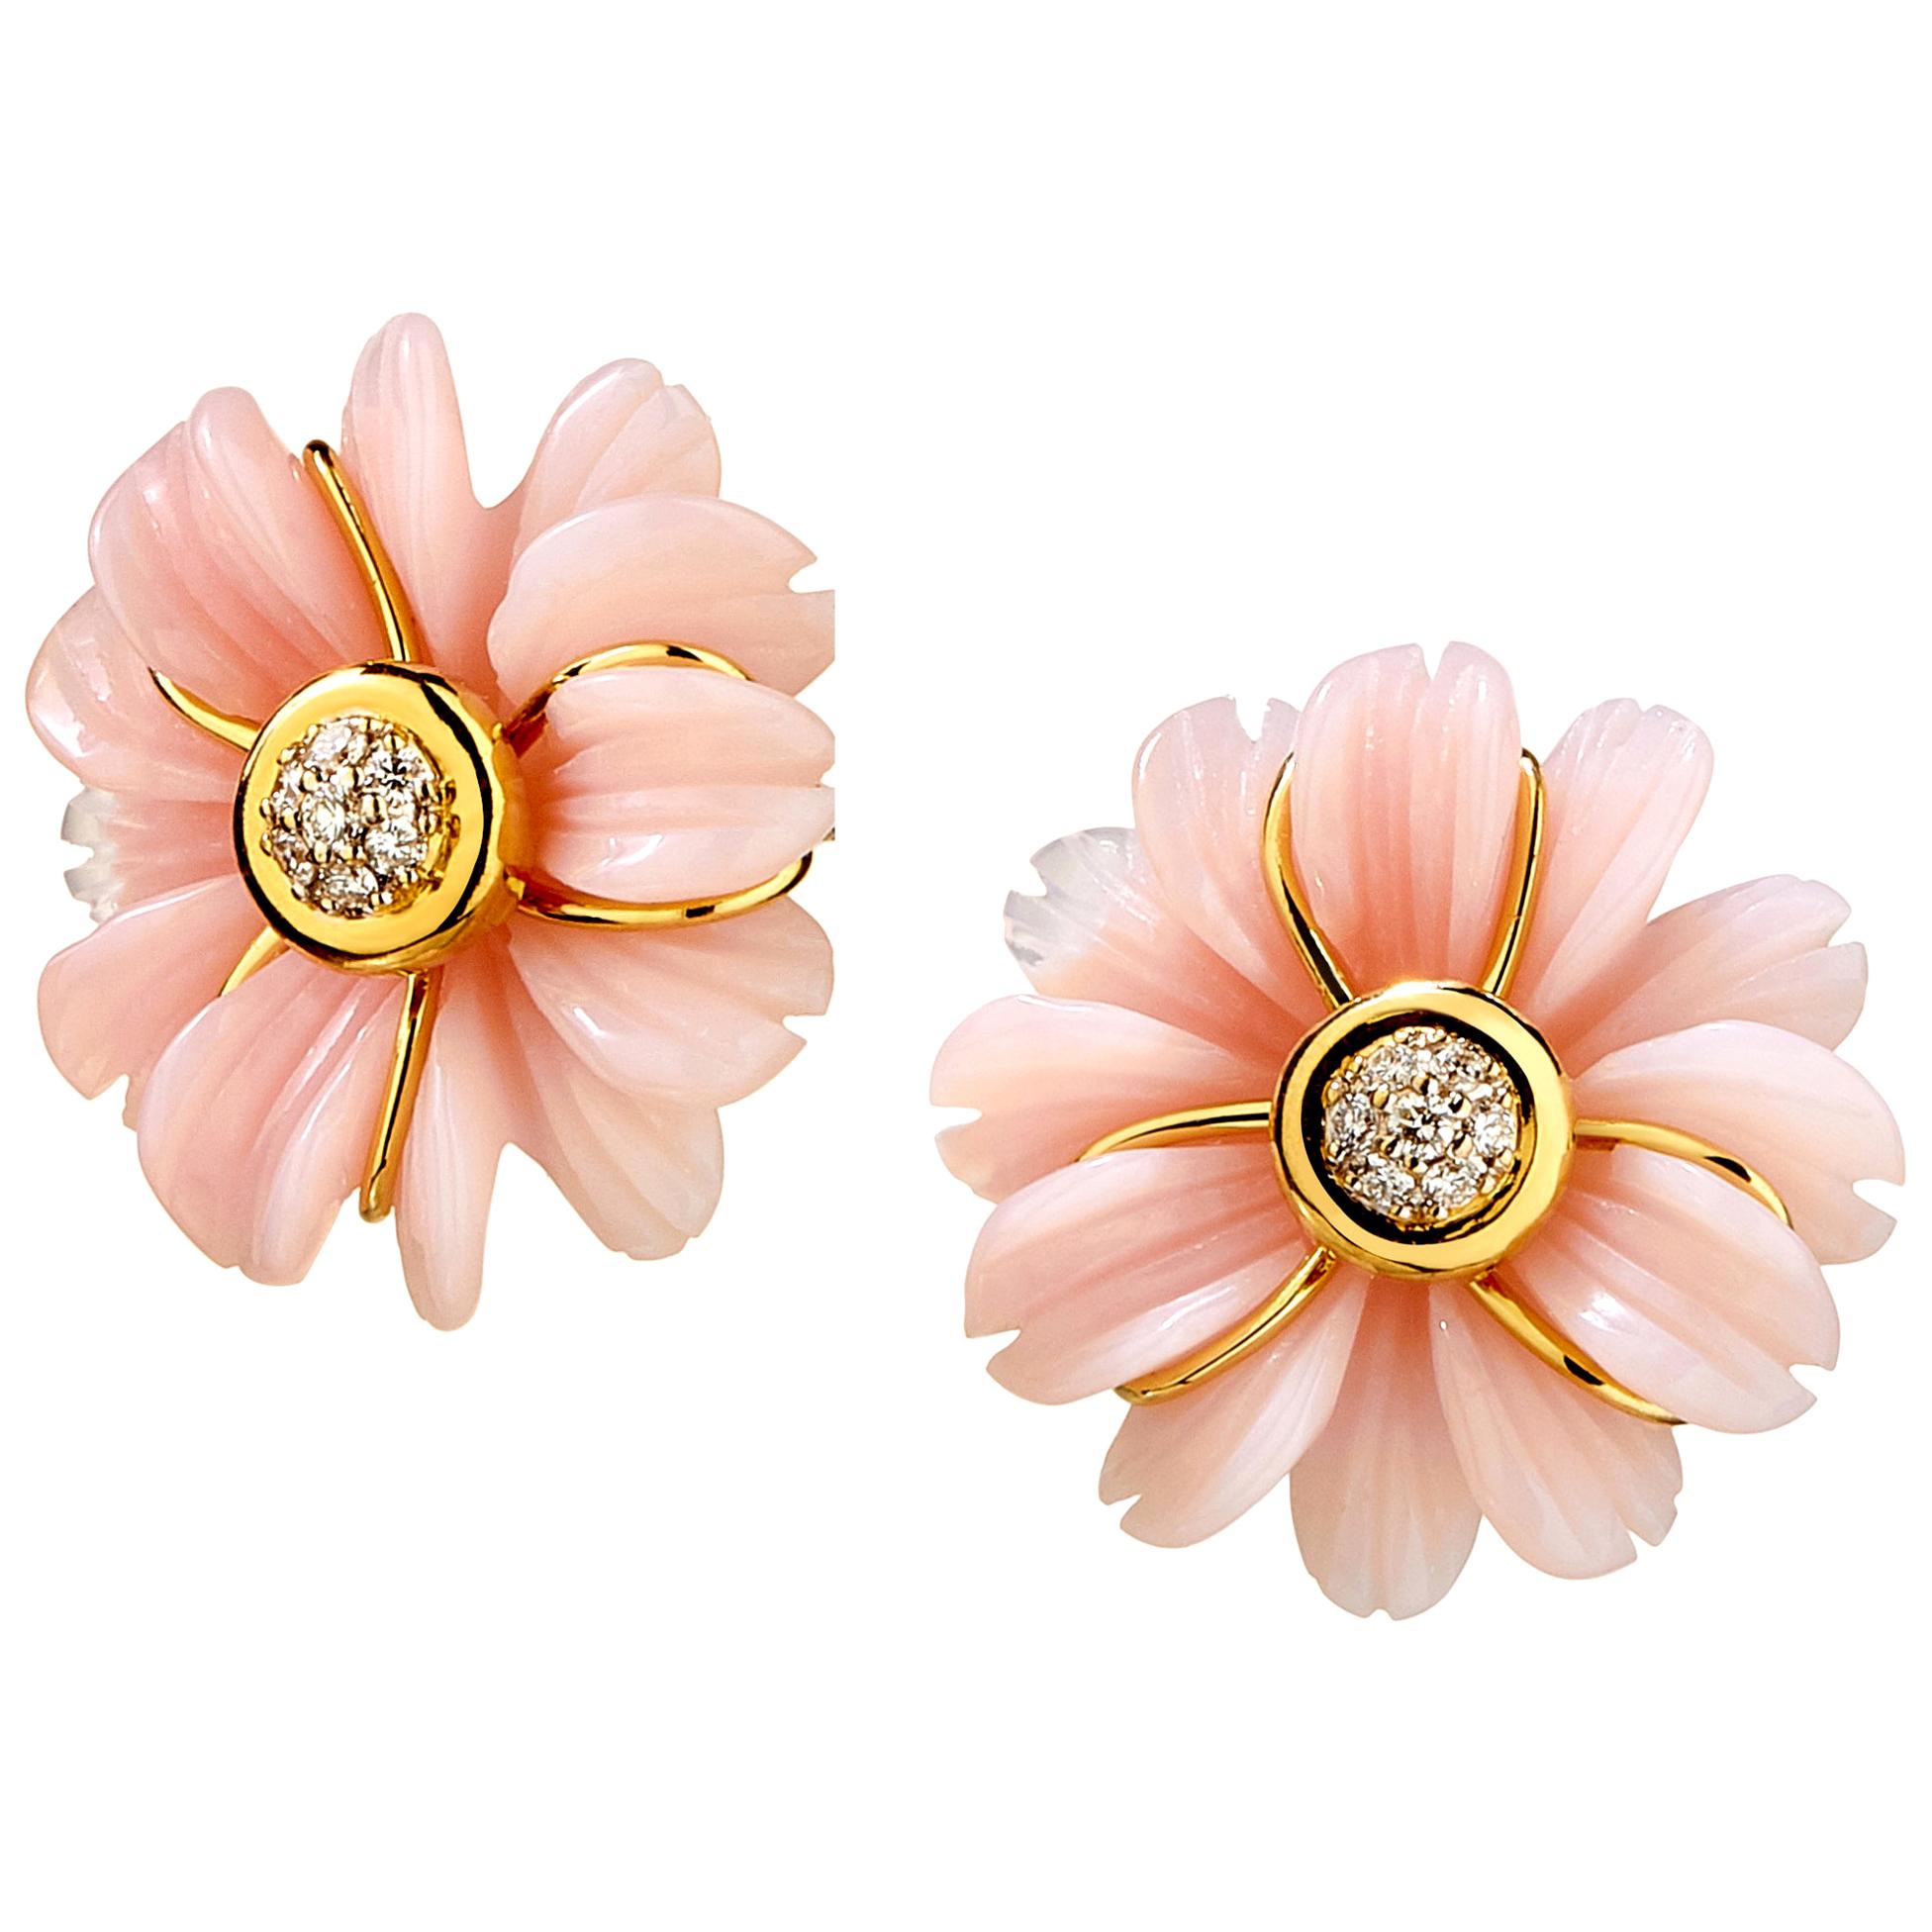 Syna Handcarved Pink Opal Flower Earrings with Diamonds